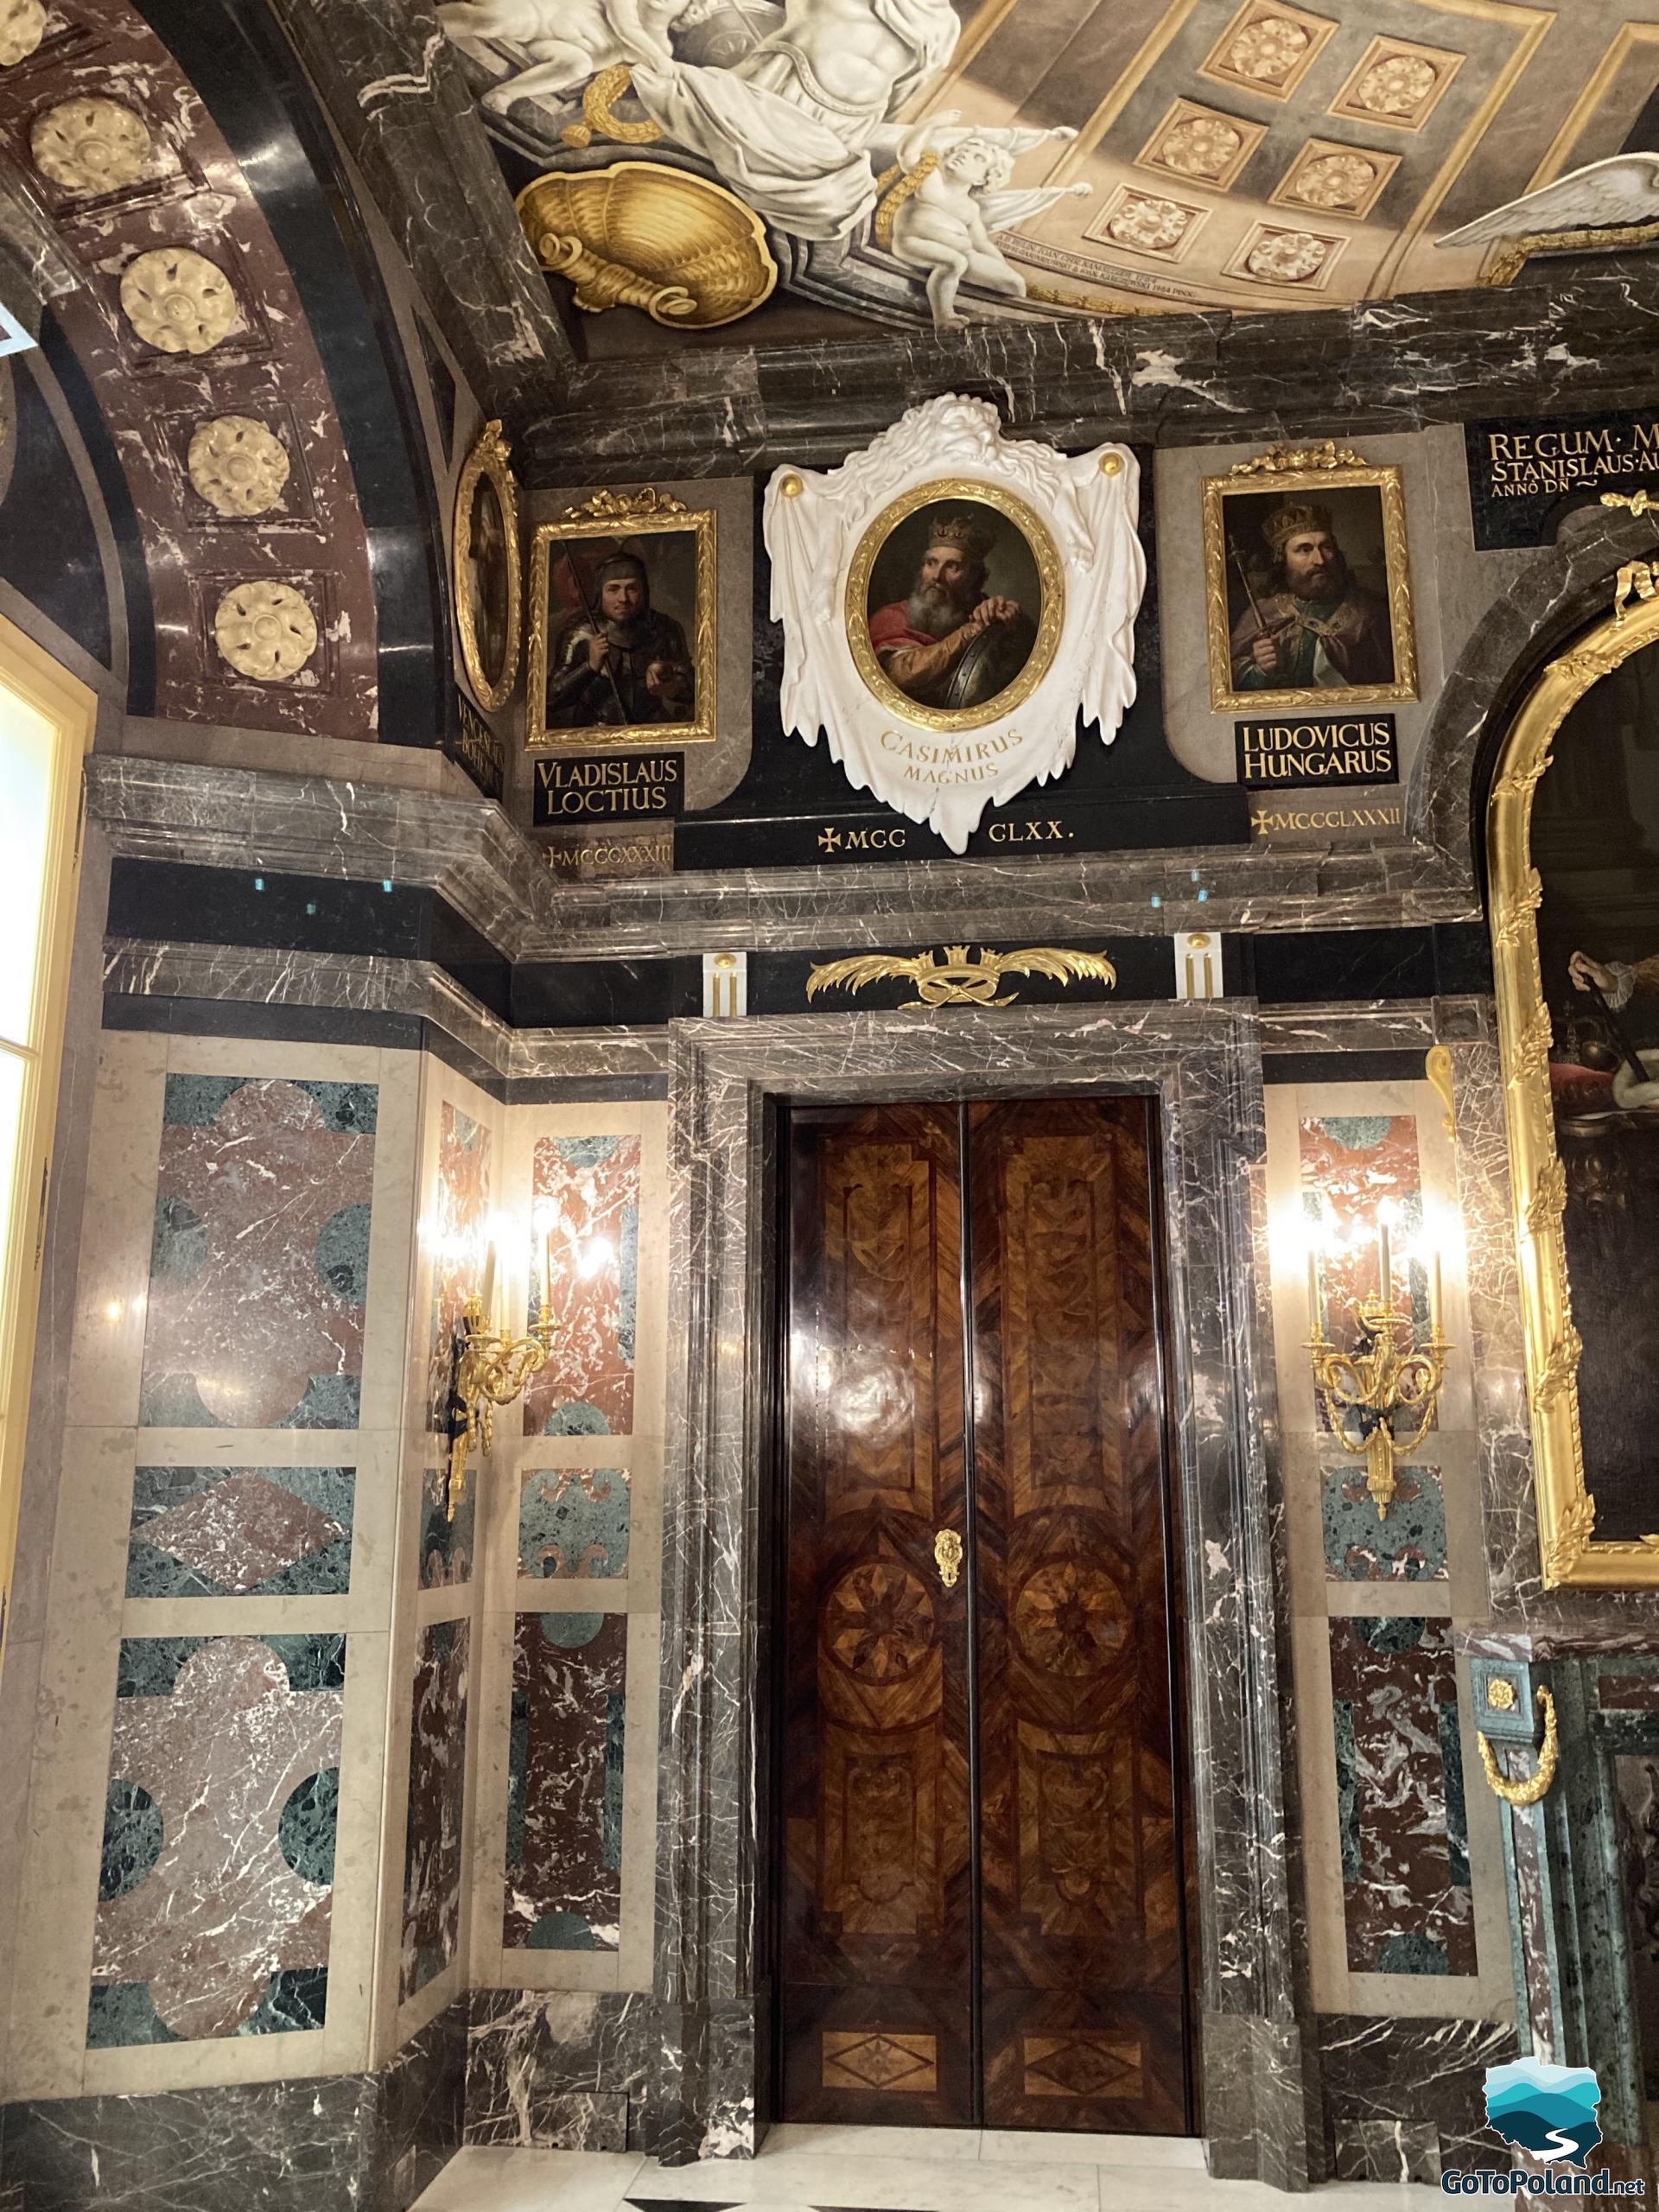 a magnificent marble hall with inlaid doors, images of rulers on the walls and a richly decorated ceiling